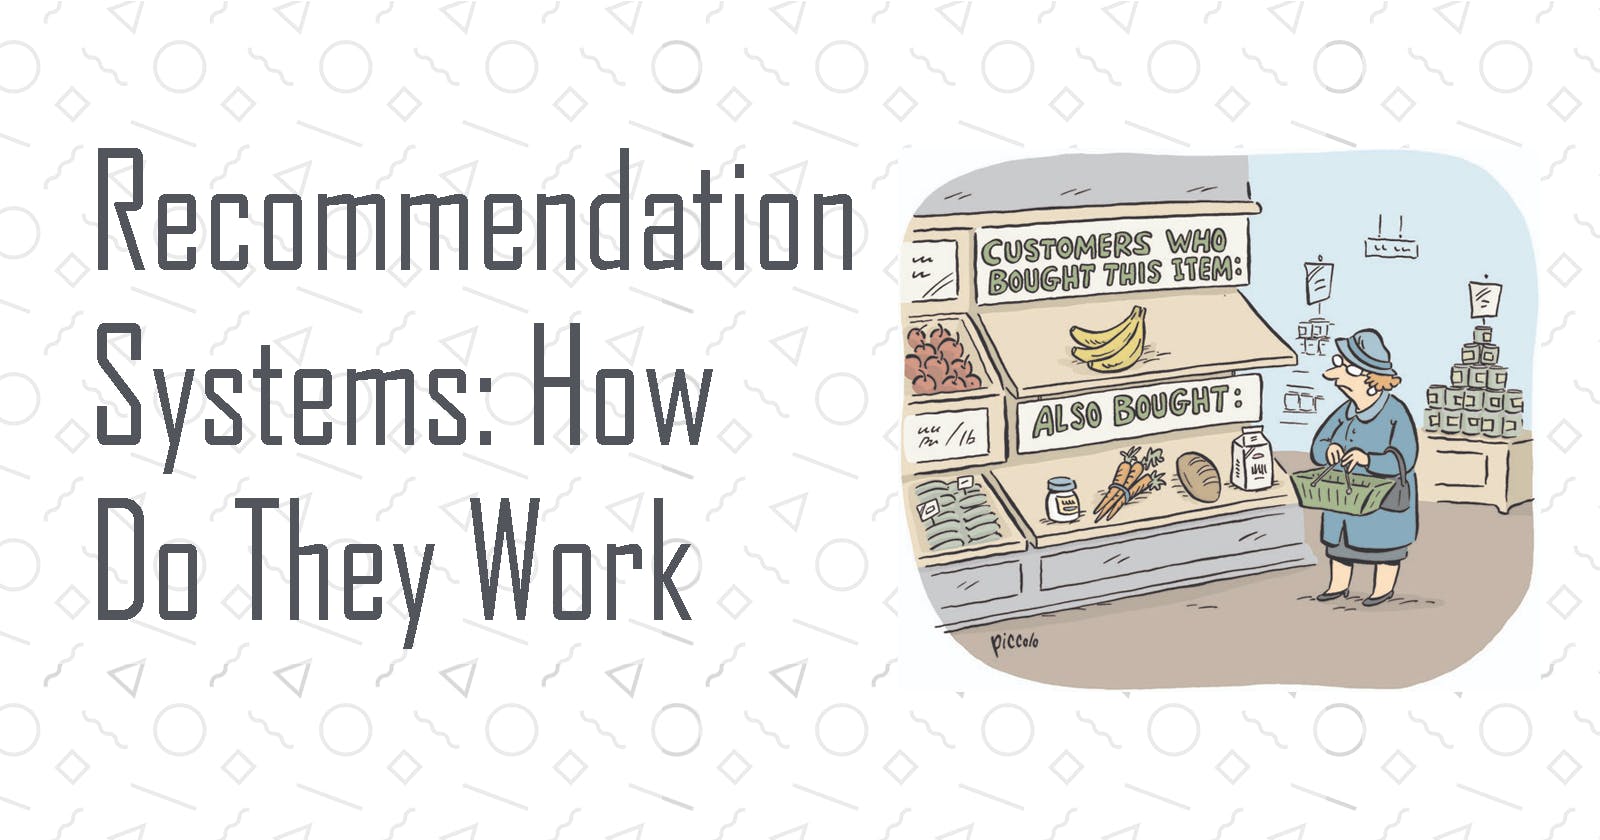 Recommendation Systems: How Do They Work